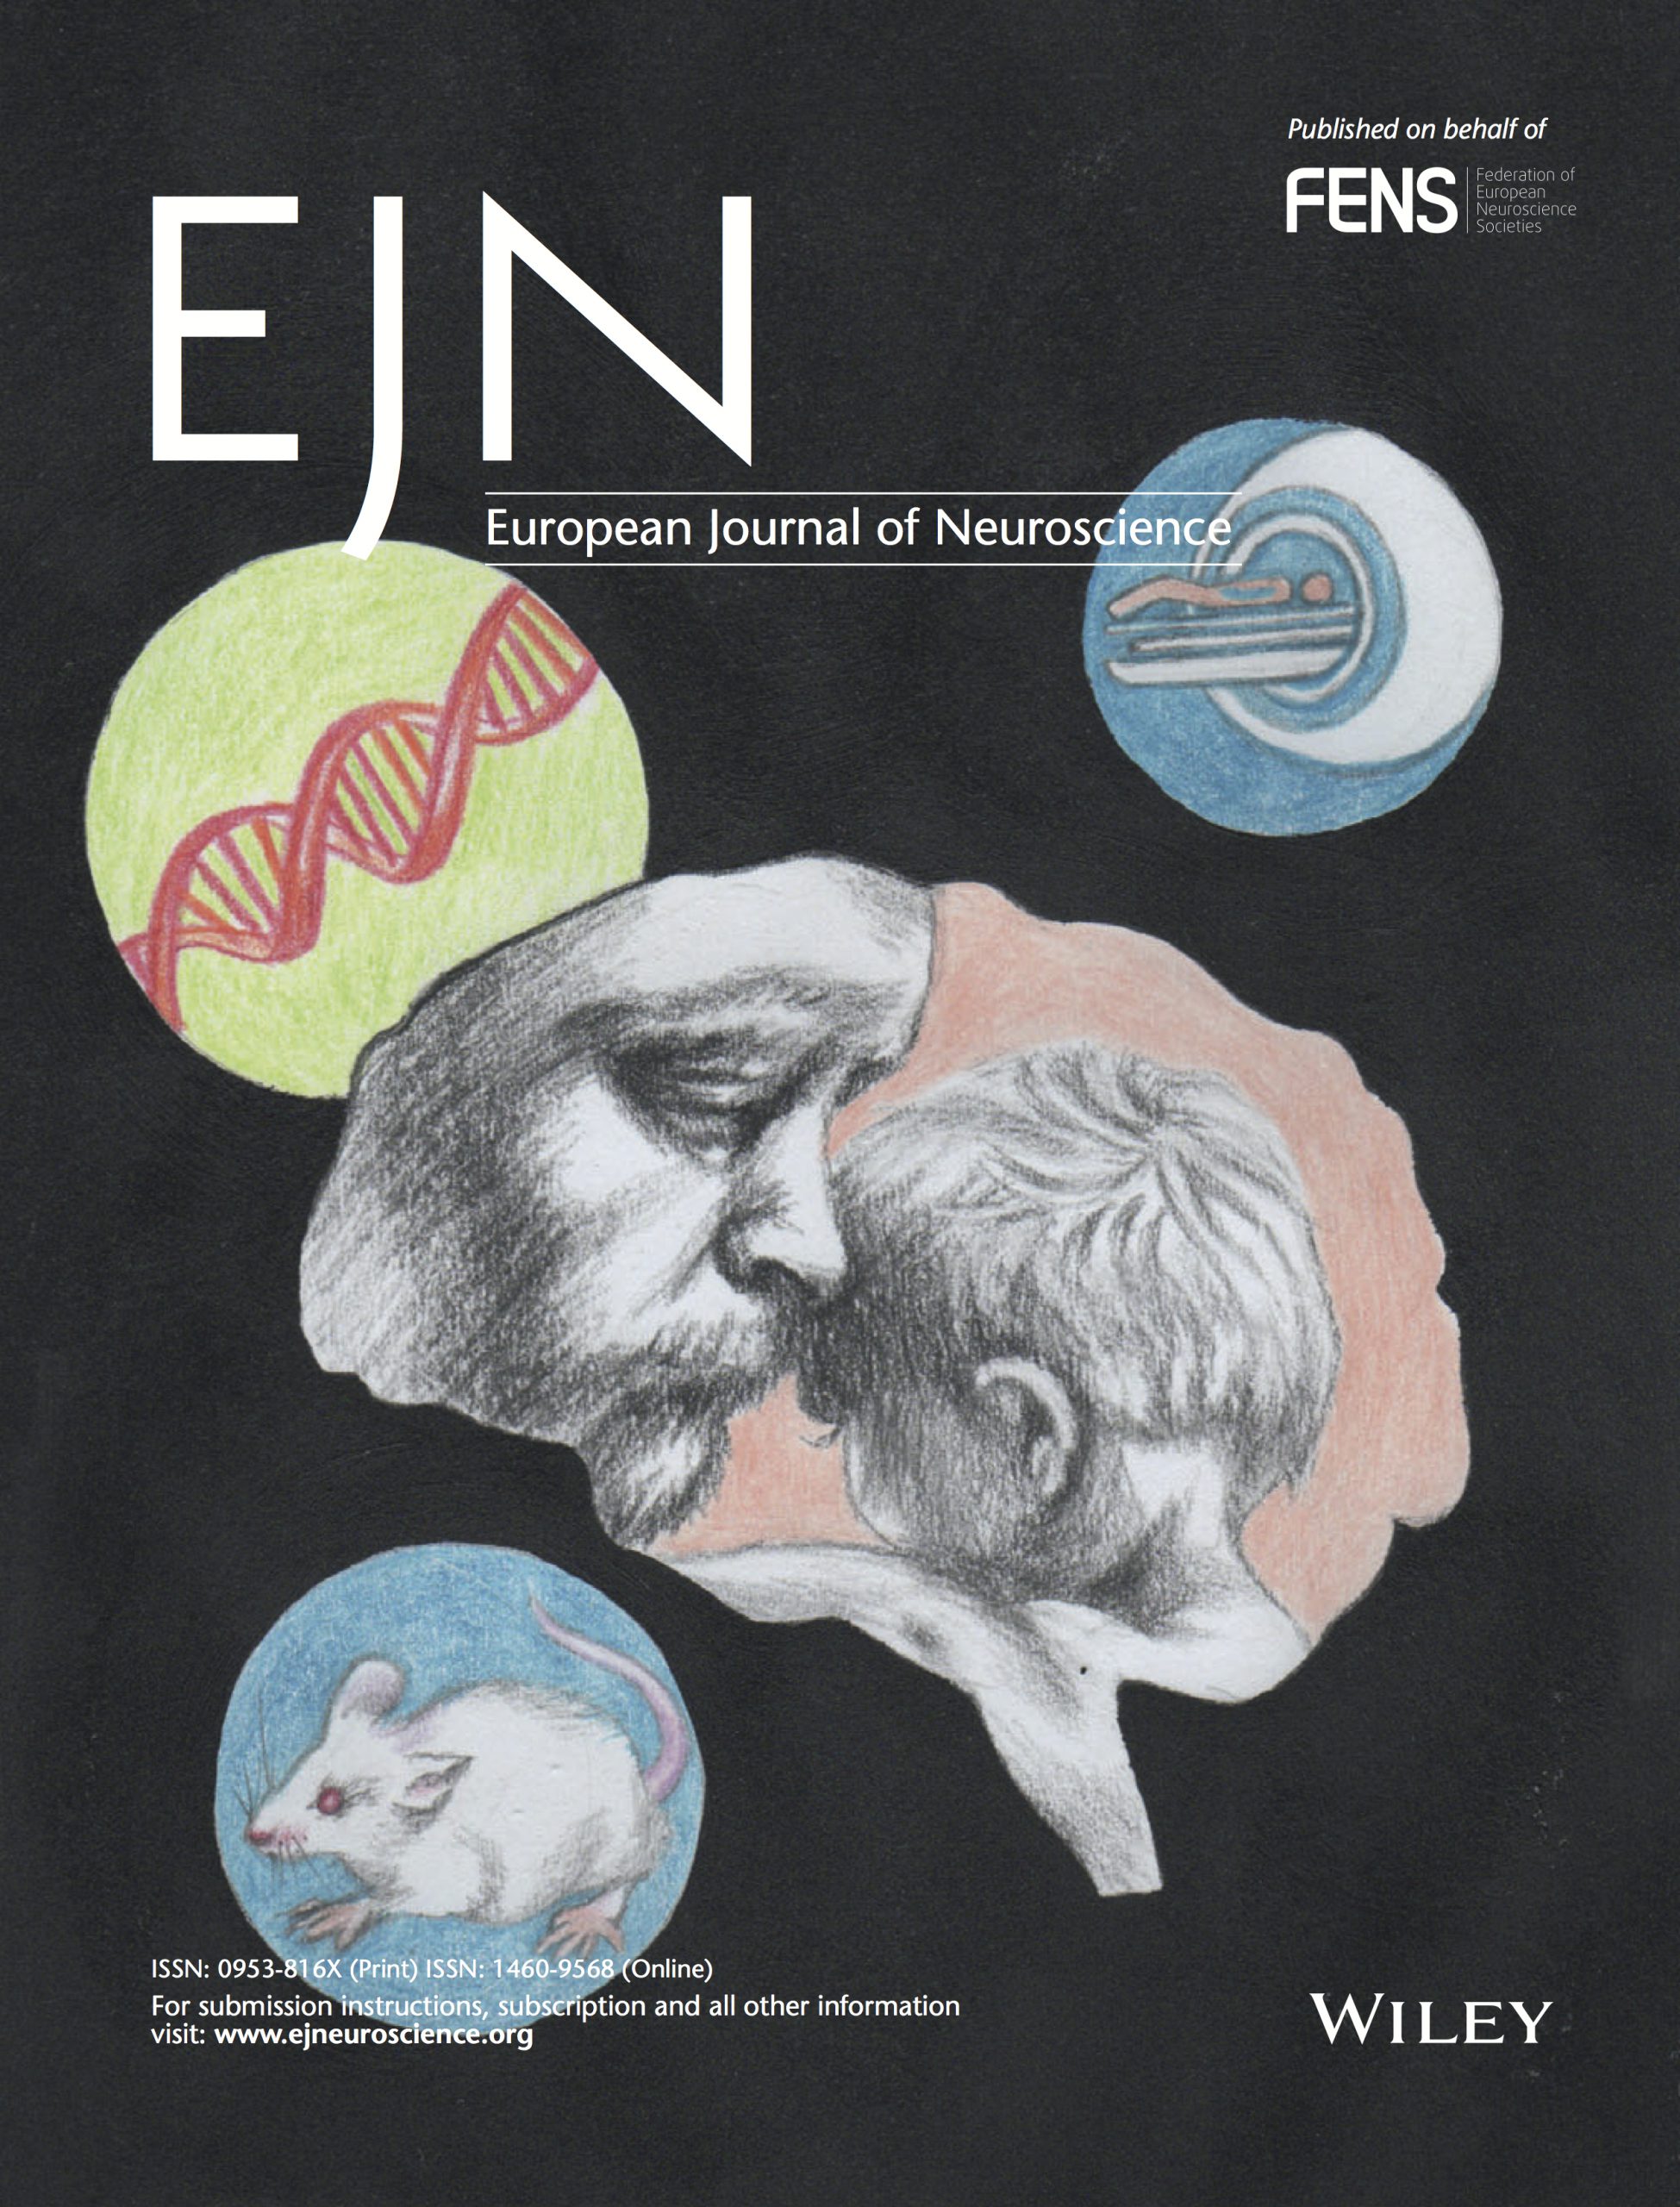 The EJN Special Issue on the Neurological Basis of Autism Spectrum Disorders is coming soon! - Federation of European Neuroscience Societies